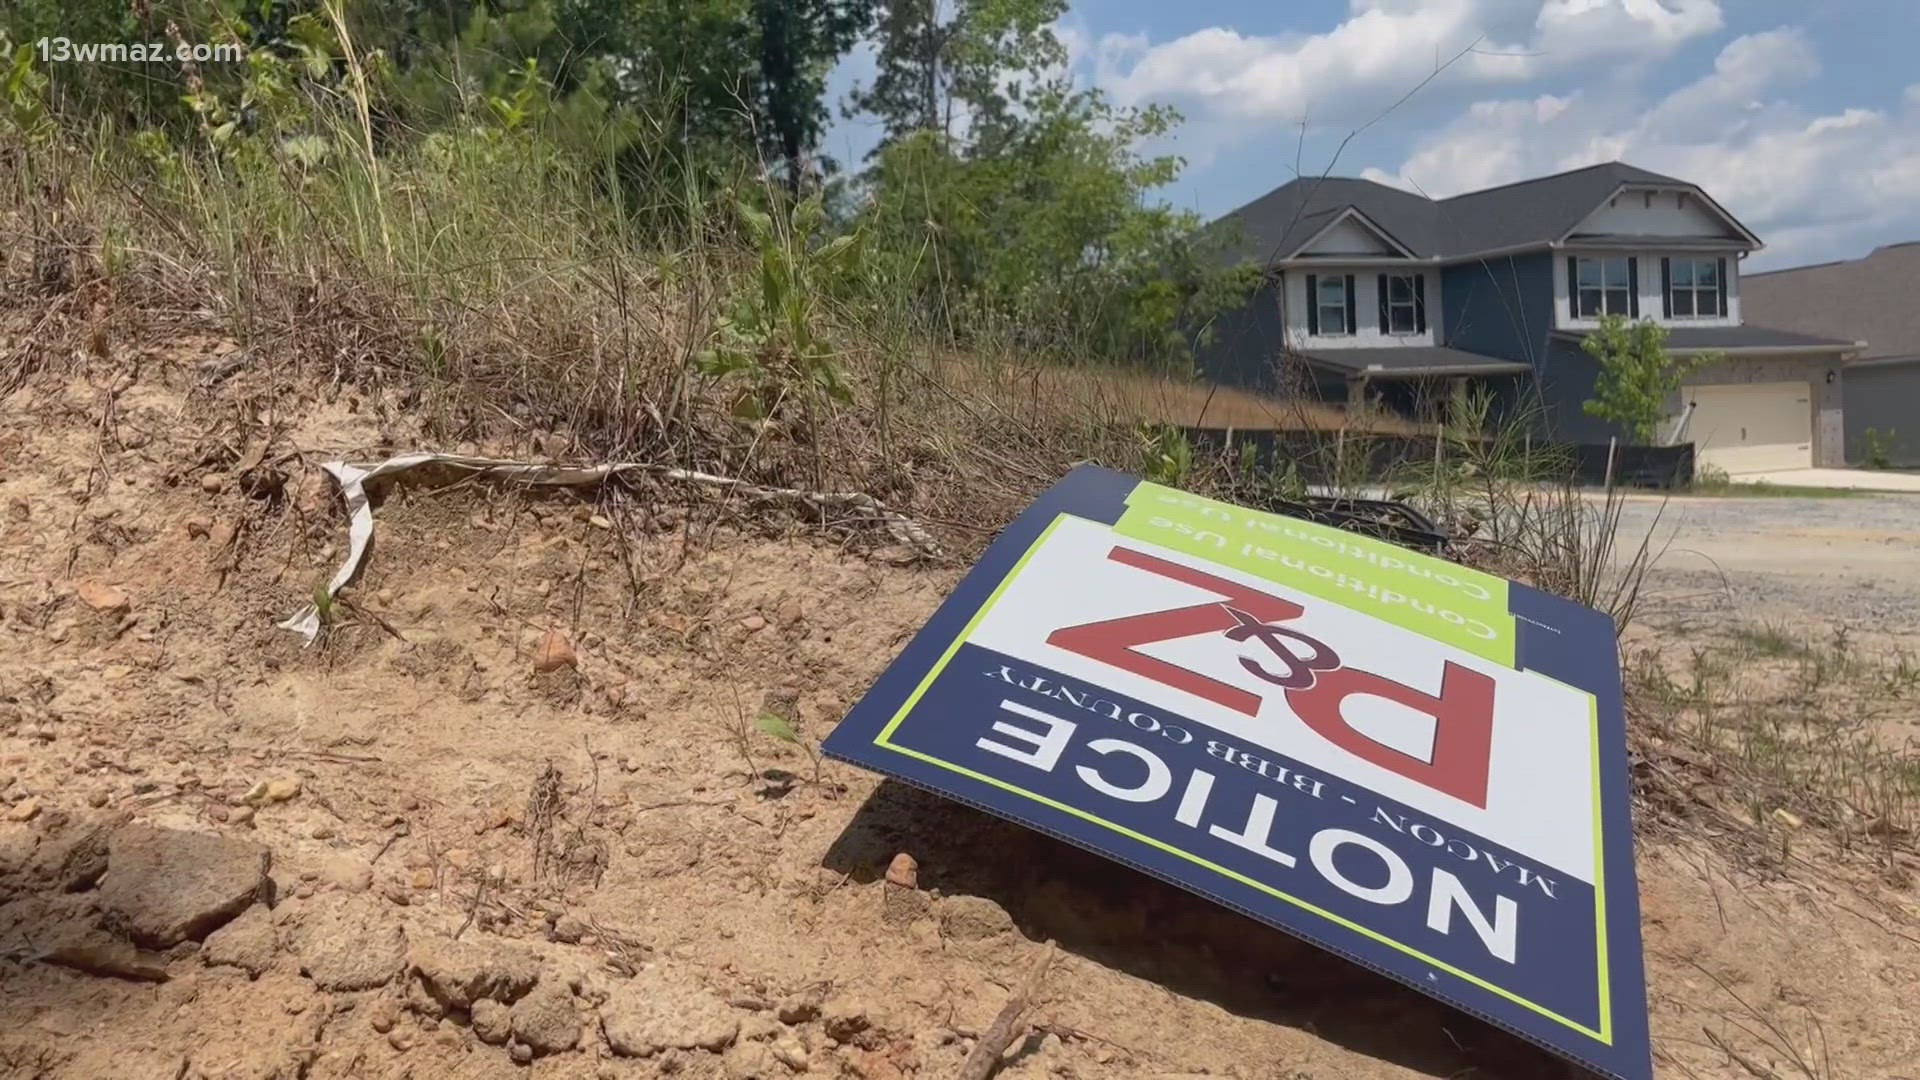 Developers are proposing to build 29 new homes in the Oakview Subdivision at the end of Britton Way, which would connect the road to Wood Oak Drive.